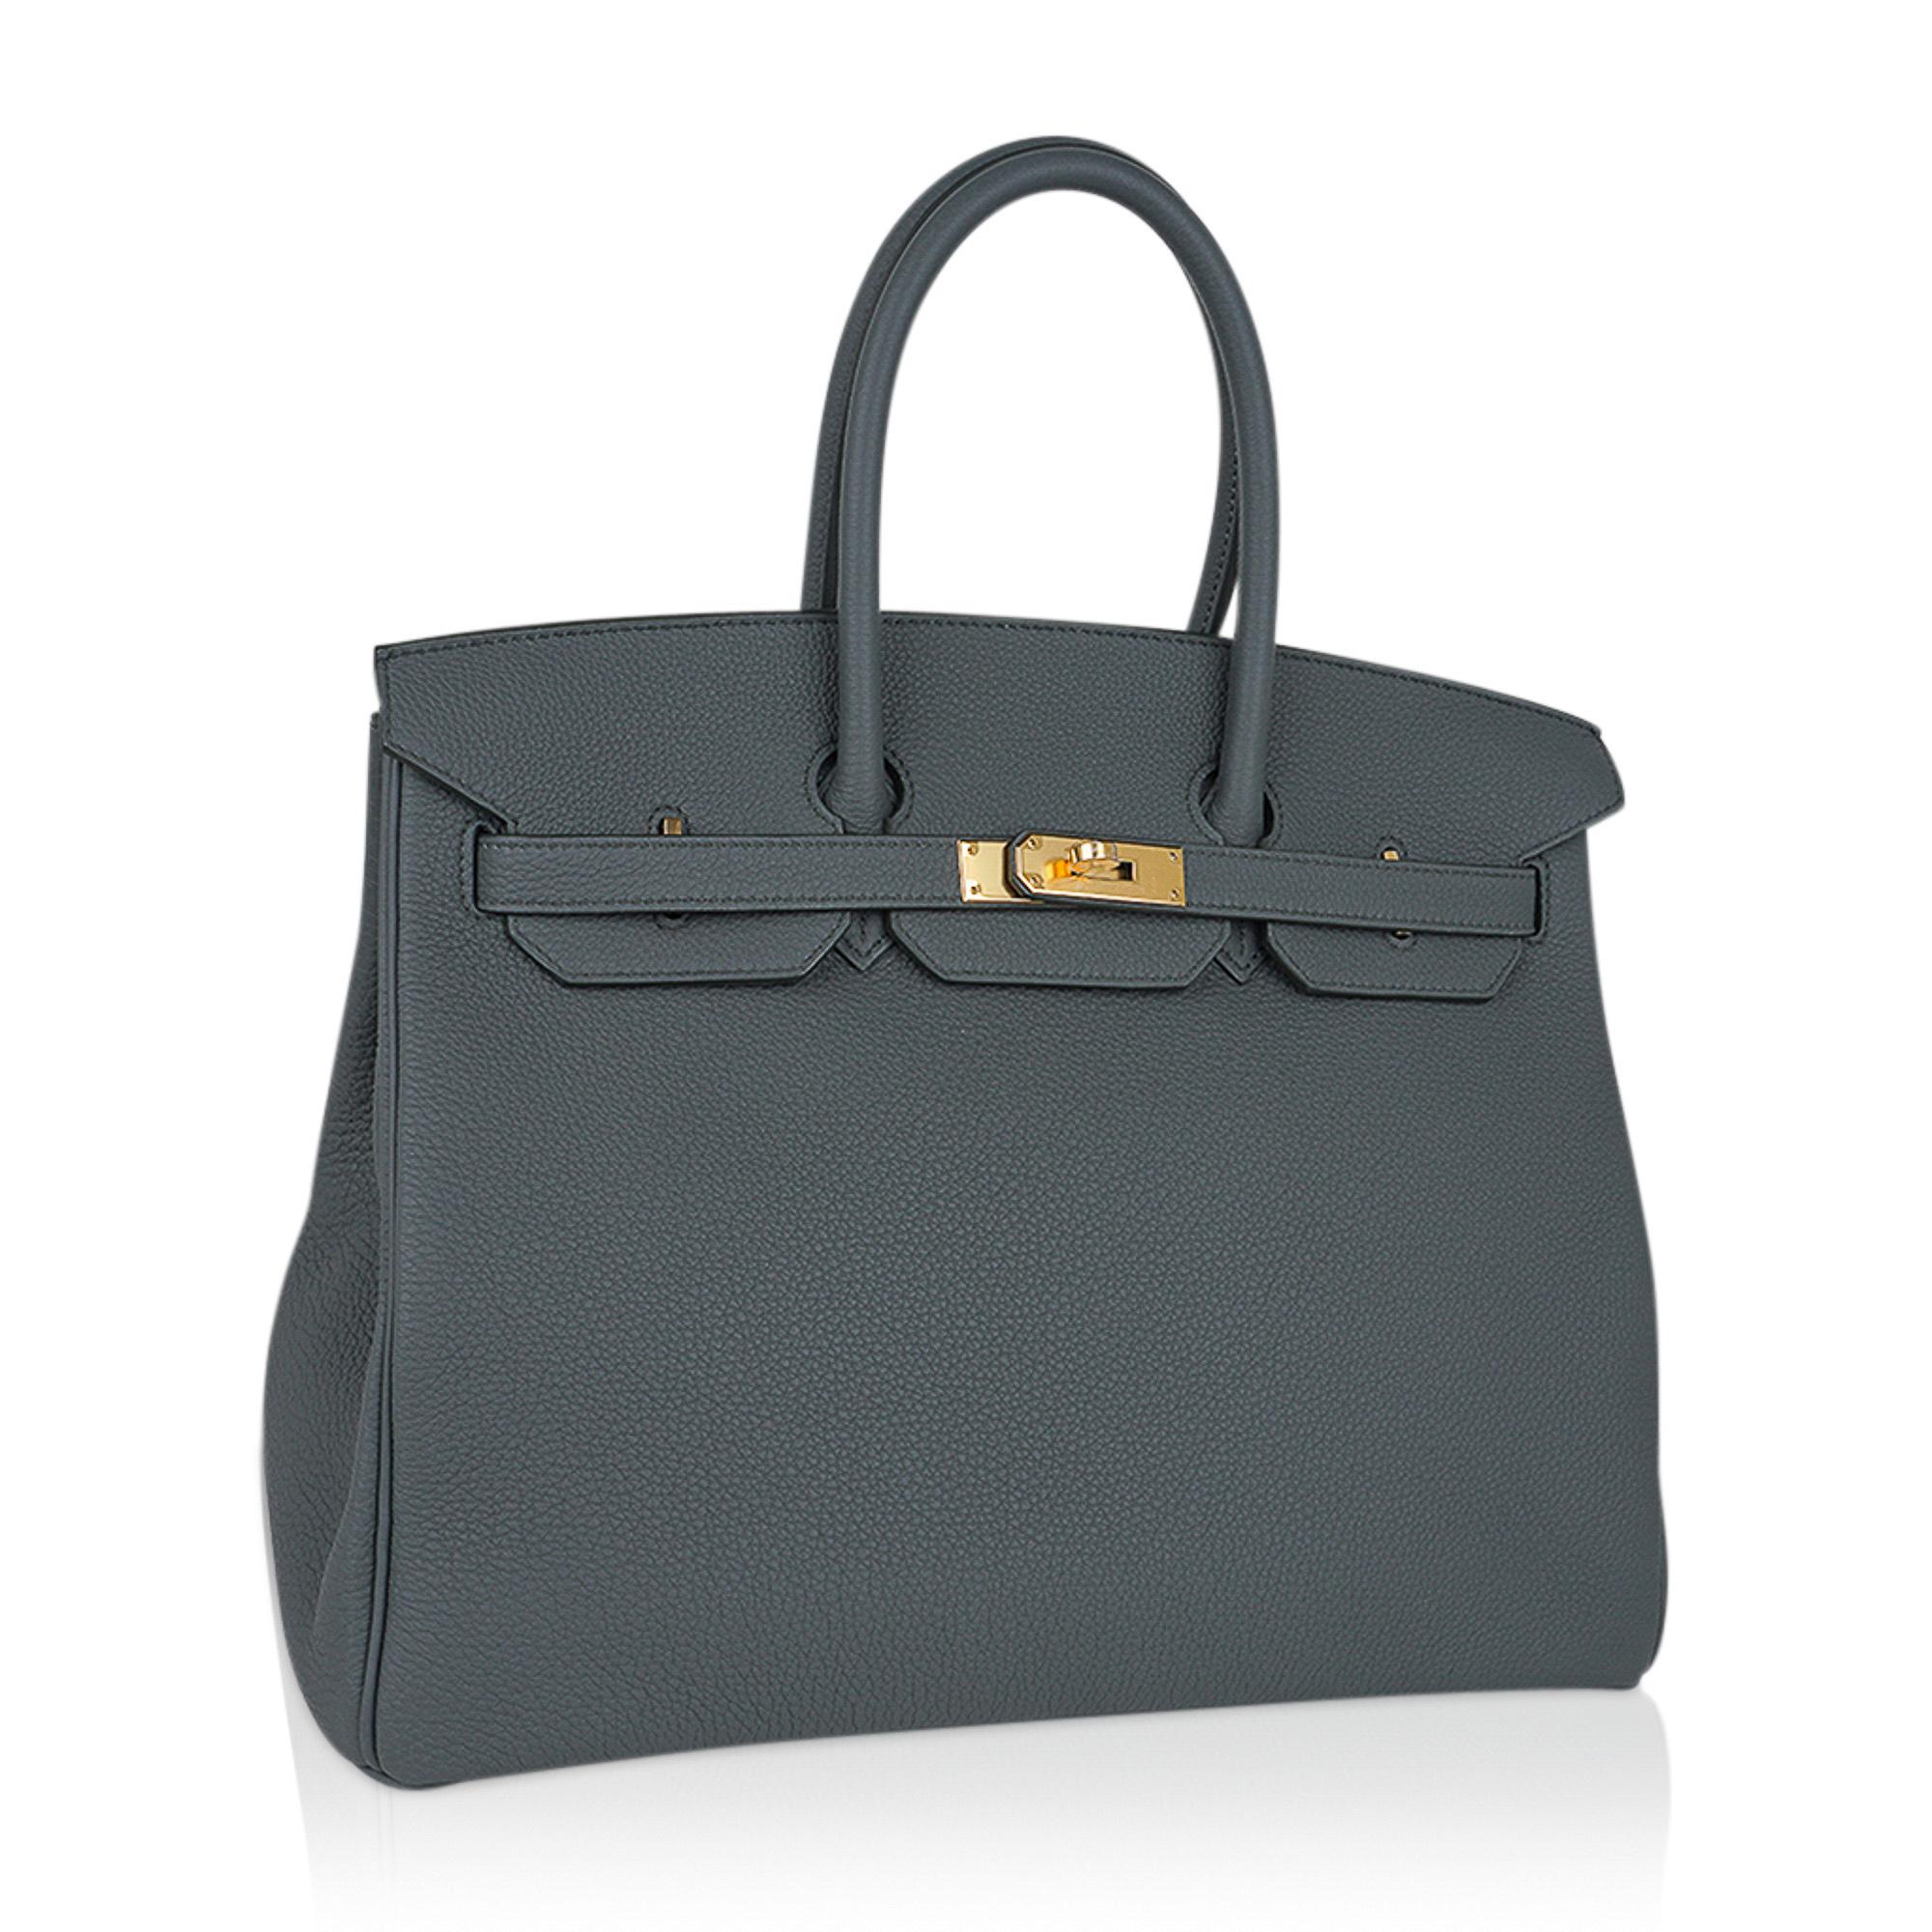 Mightychic offers an Hermes Birkin 35 bag featured in gorgeous Vert Amande.
A beautiful muted green-gray-tone makes this a fabulous neutral Birkin bag.
Rich and timeless with gold hardware.
Togo leather is textured and resistant to scratches.
Comes